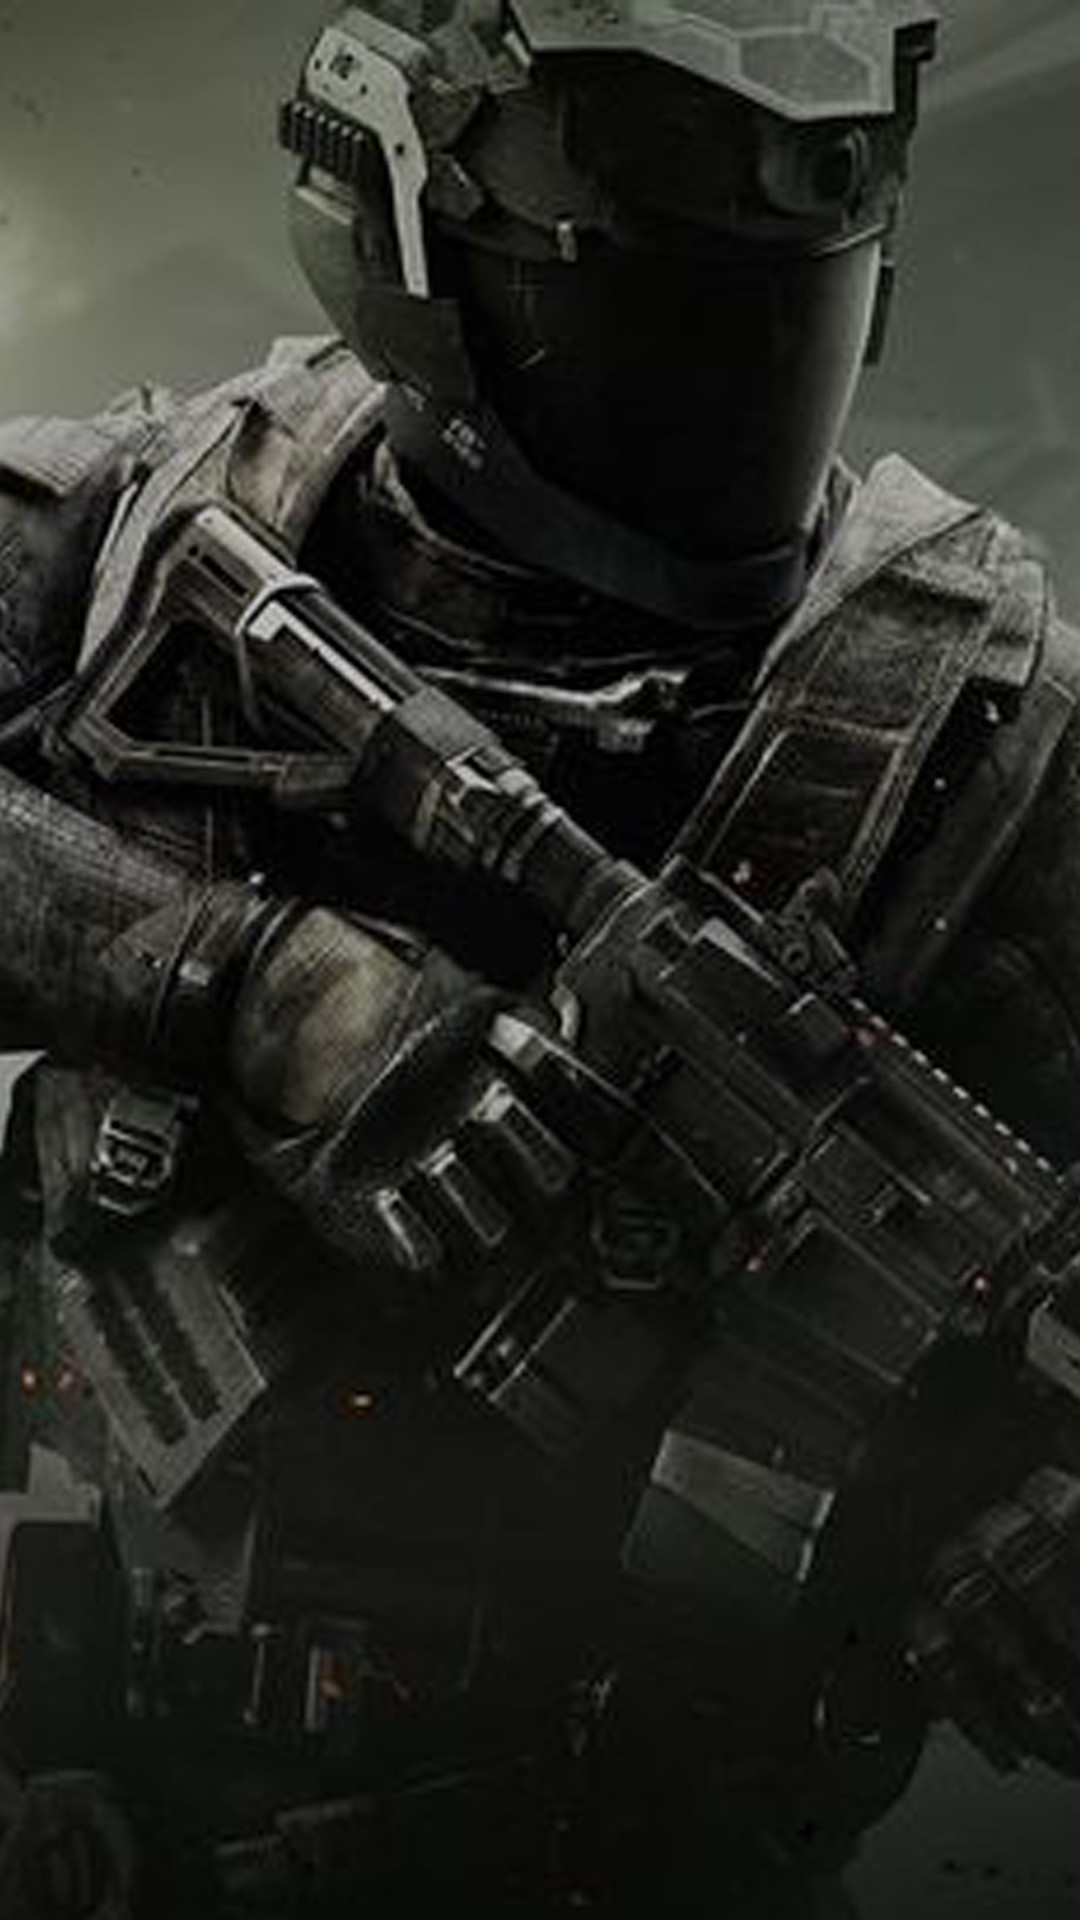 call of duty phone wallpaper,personal protective equipment,helmet,fictional character,darkness,games